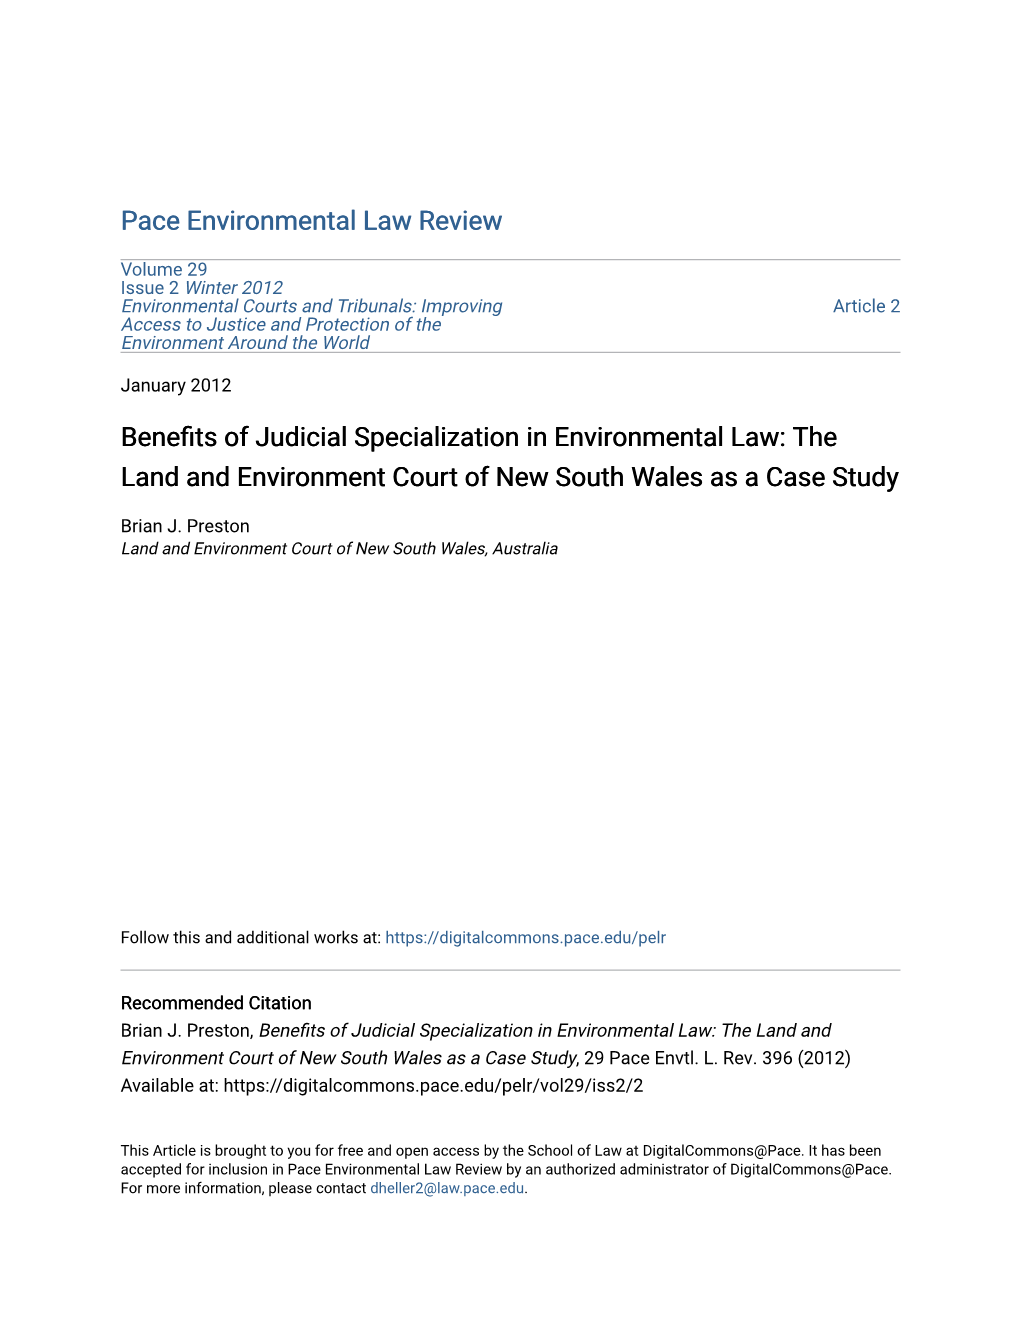 Benefits of Judicial Specialization in Environmental Law: the Land and Environment Court of New South Wales As a Case Study